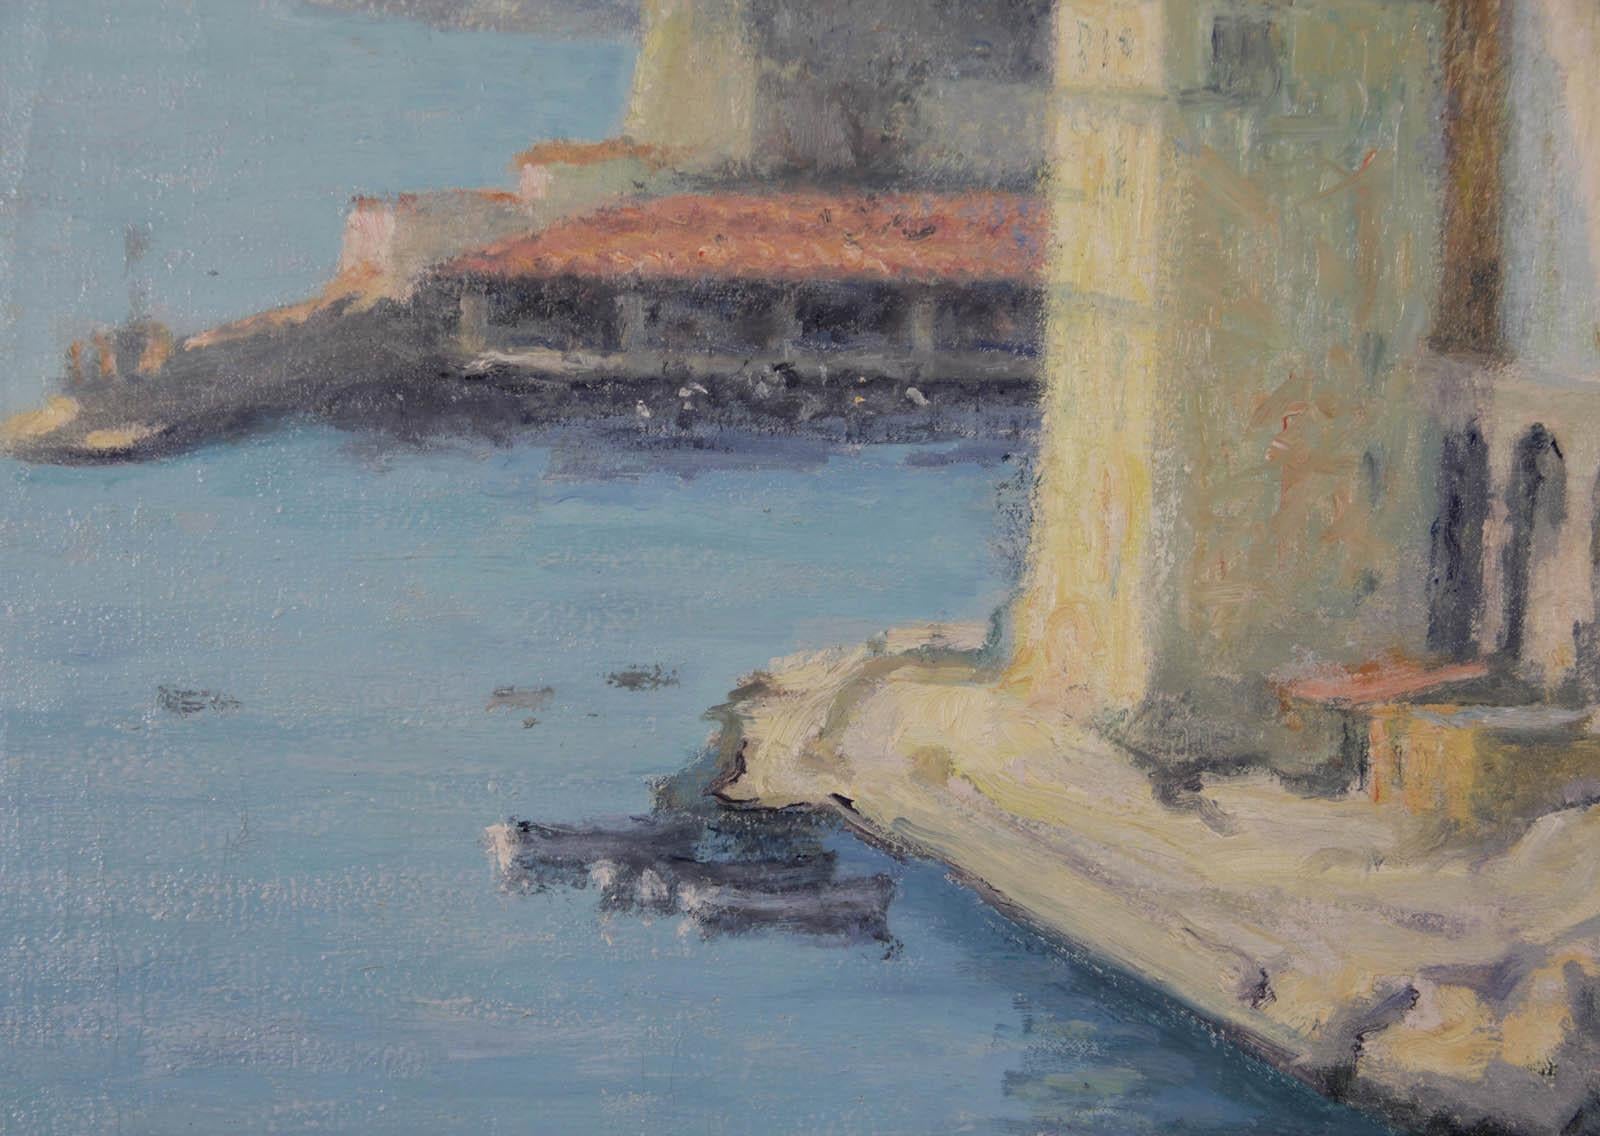 Villefranche sur Mer - Post-Impressionist Painting by Raymond Thibesart